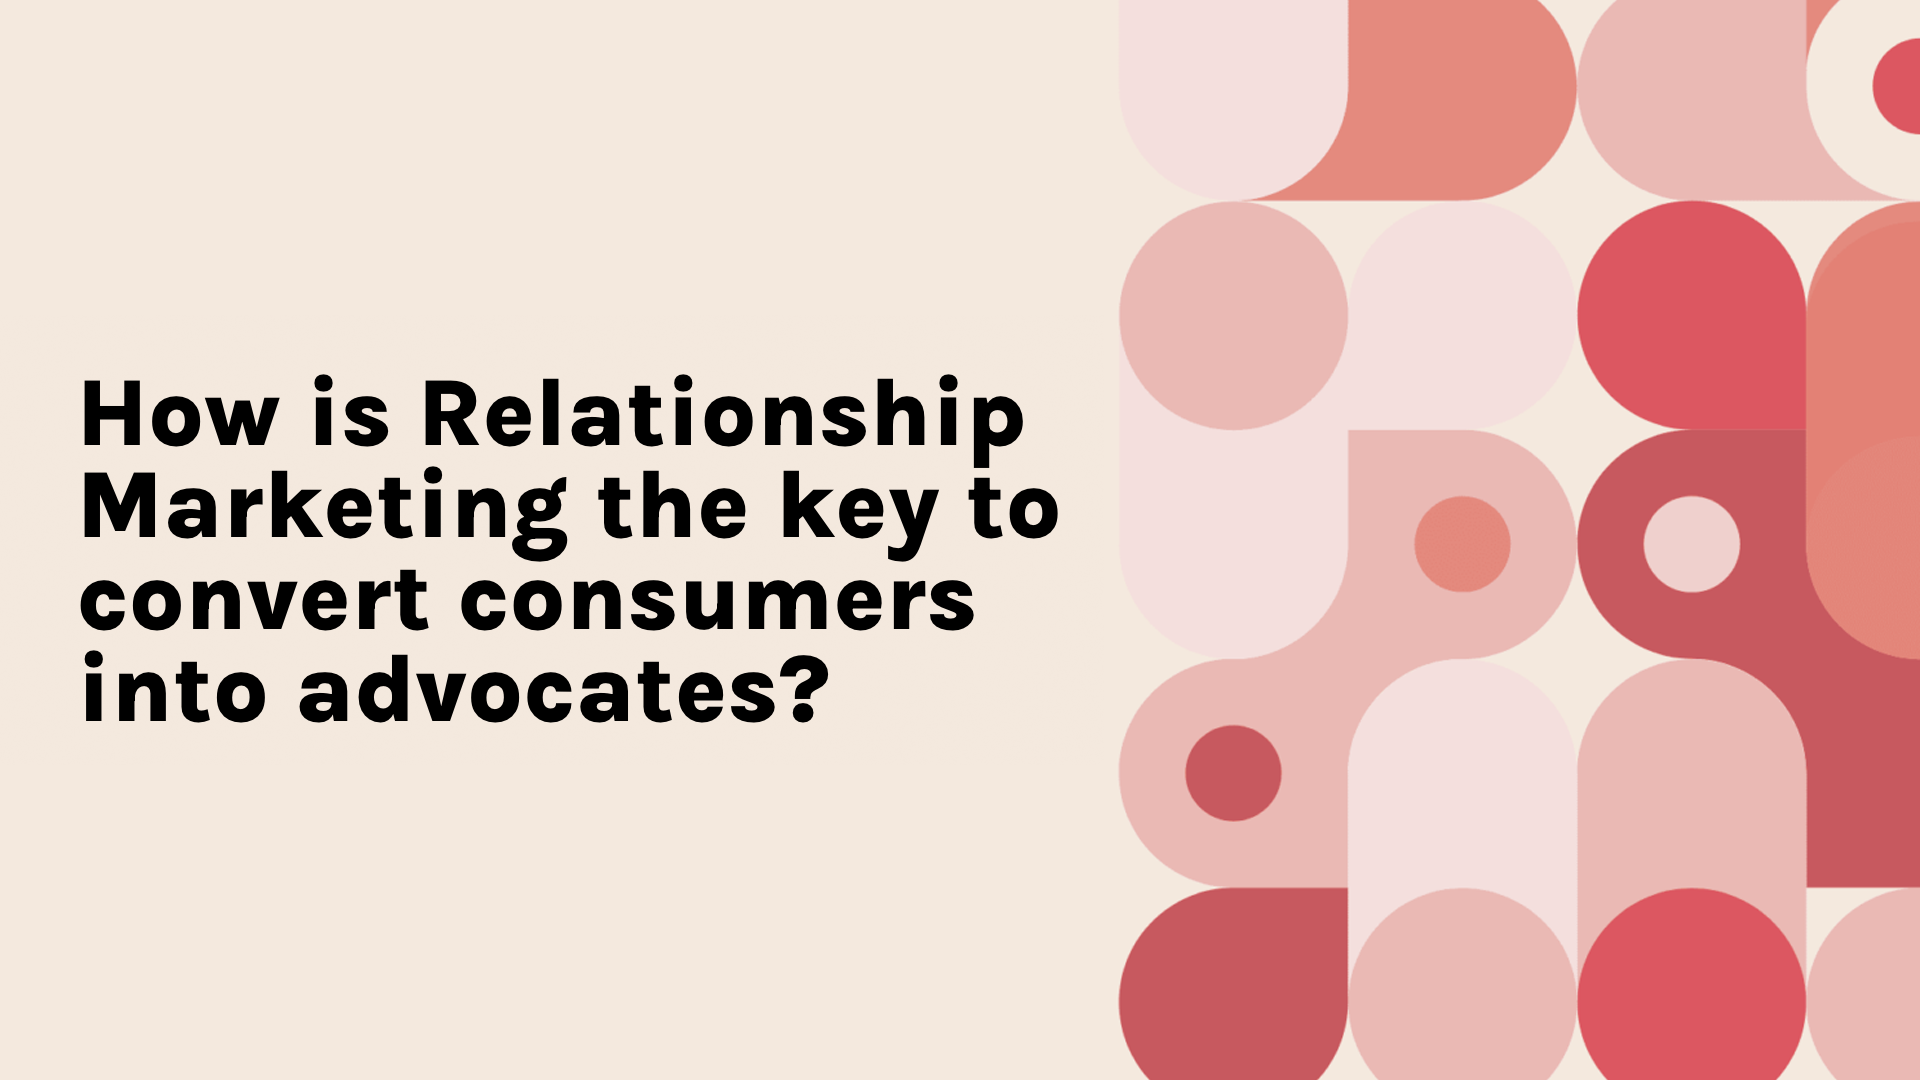 How is Relationship Marketing the key to converting consumers into advocates?